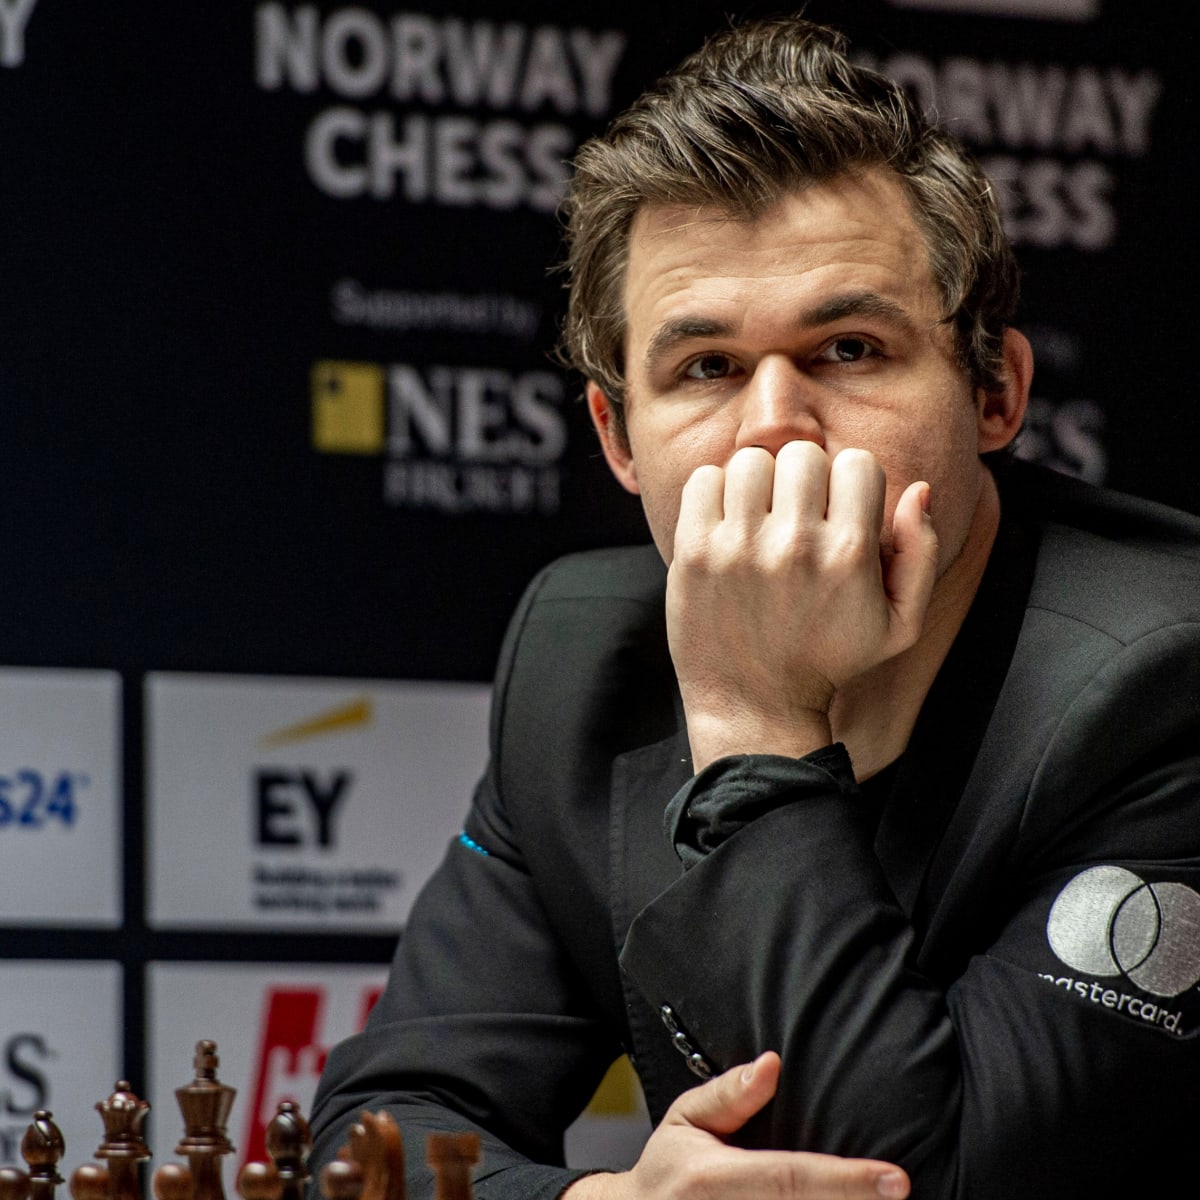 Chess world champion Magnus Carlsen explicitly accuses rival of cheating